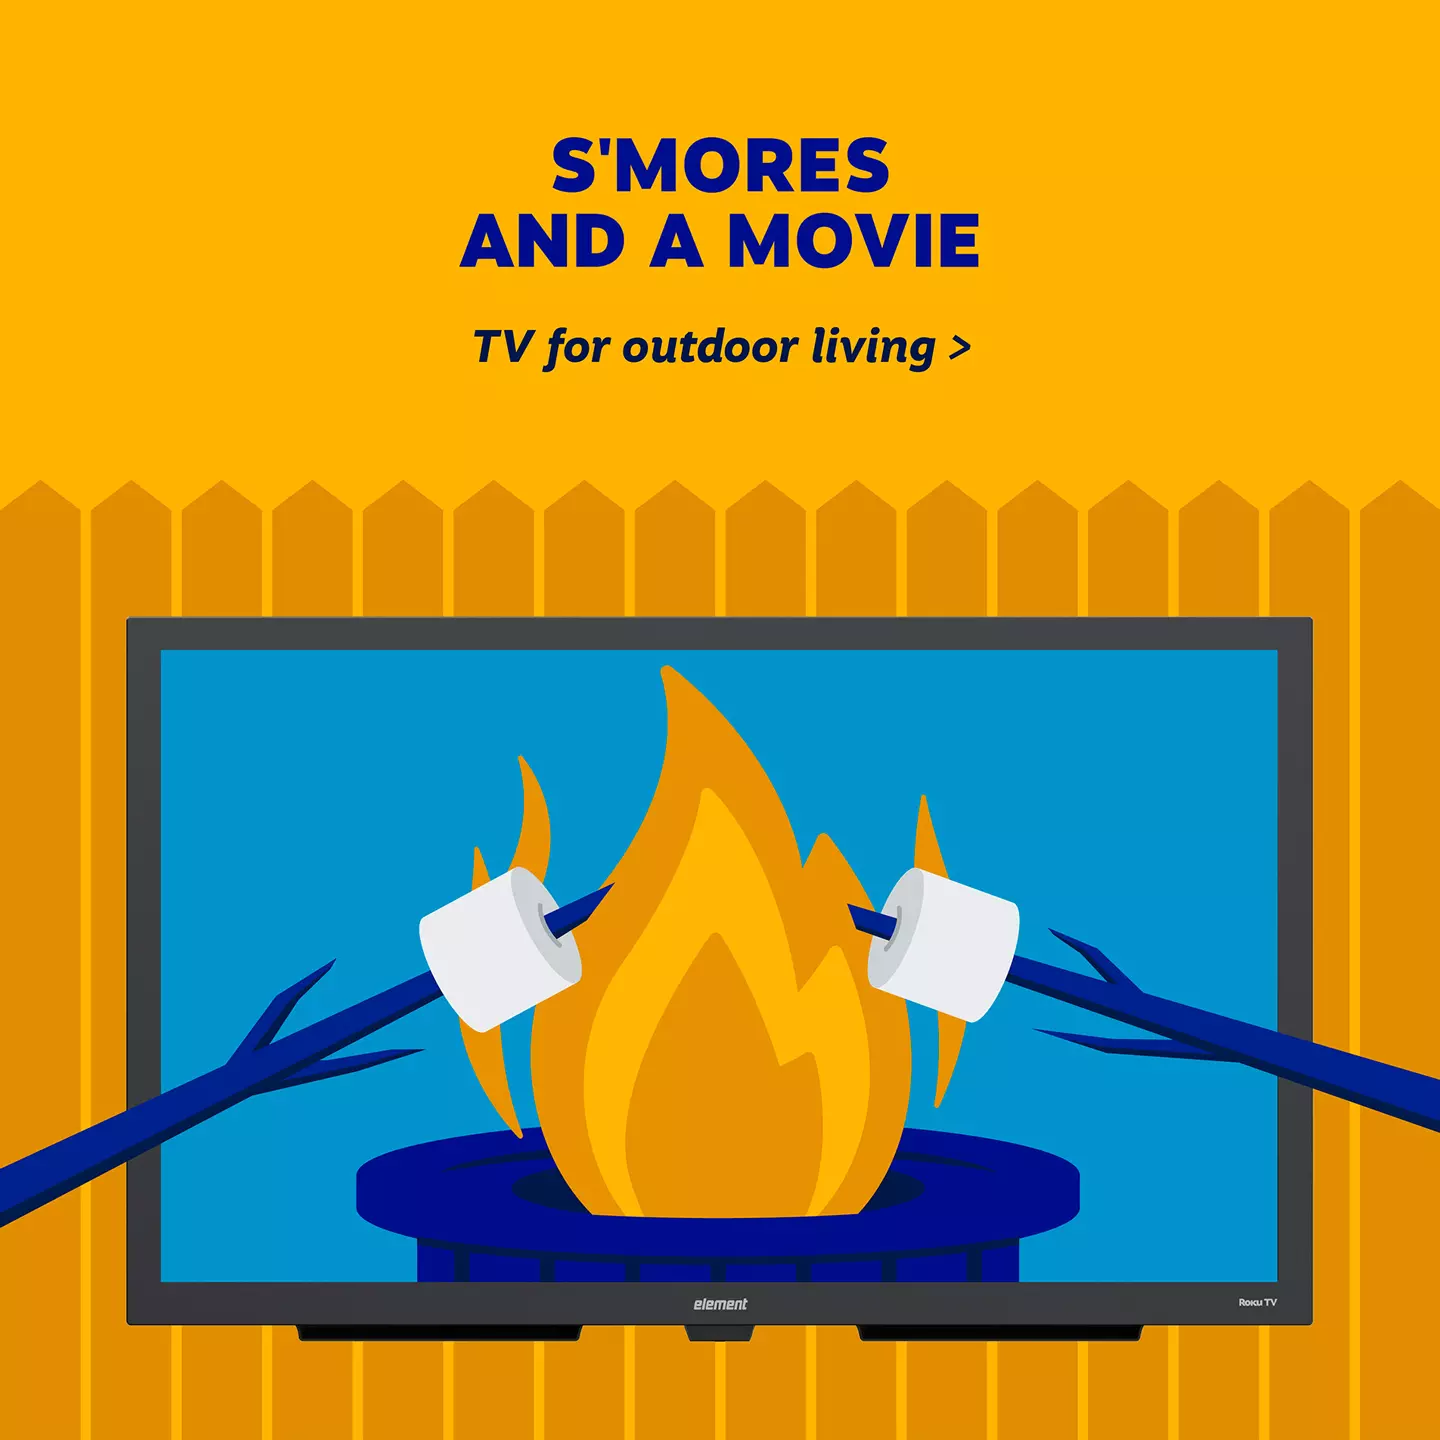 S'mores and a movie - shop Element's 55 inch weatherproof outdoor TV